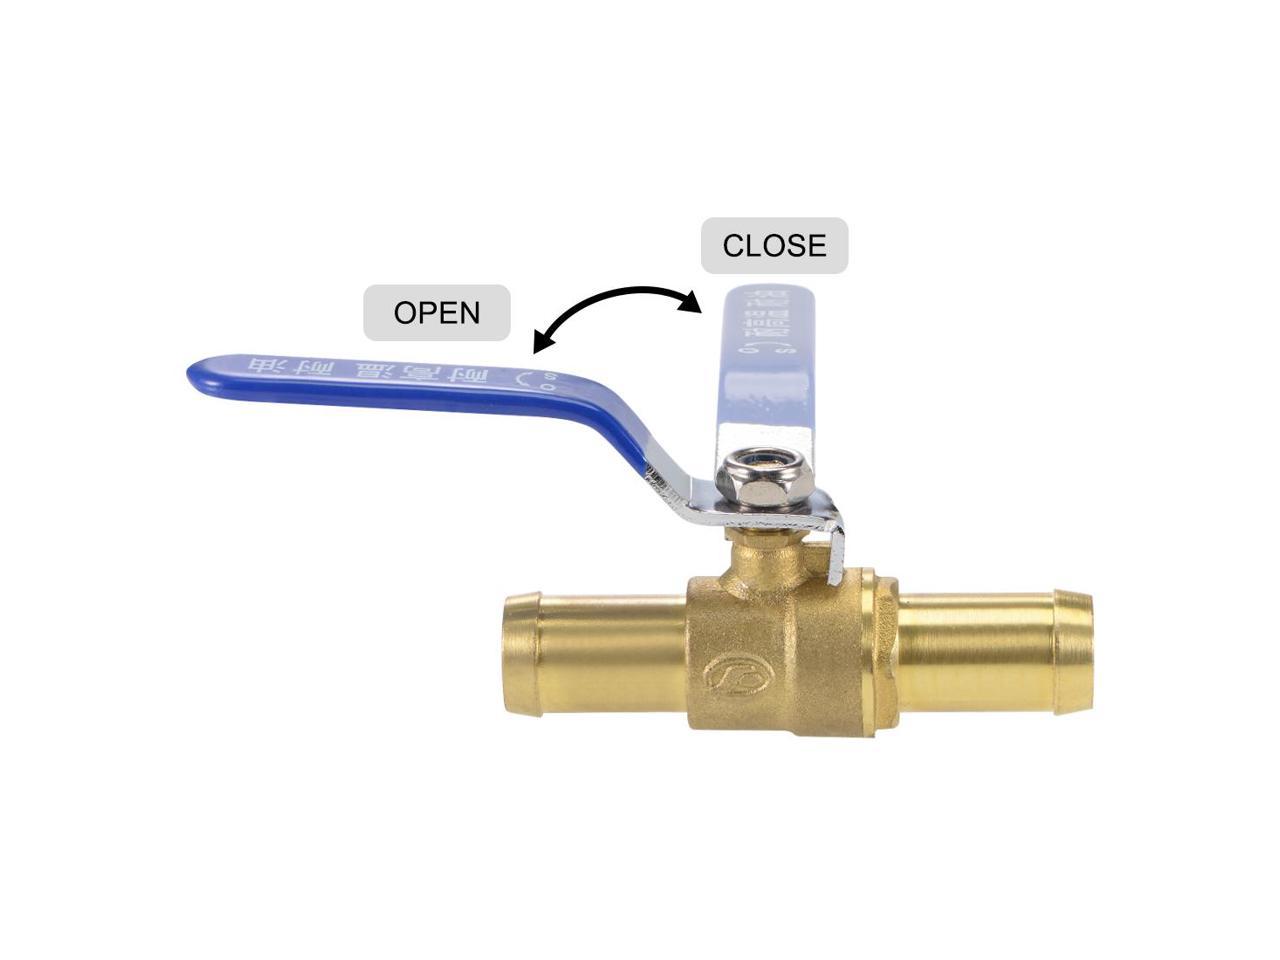 19mm Pipe ID hose Barb Brass Ball Valve Fitting Blue Lever Handle Water Air L85 